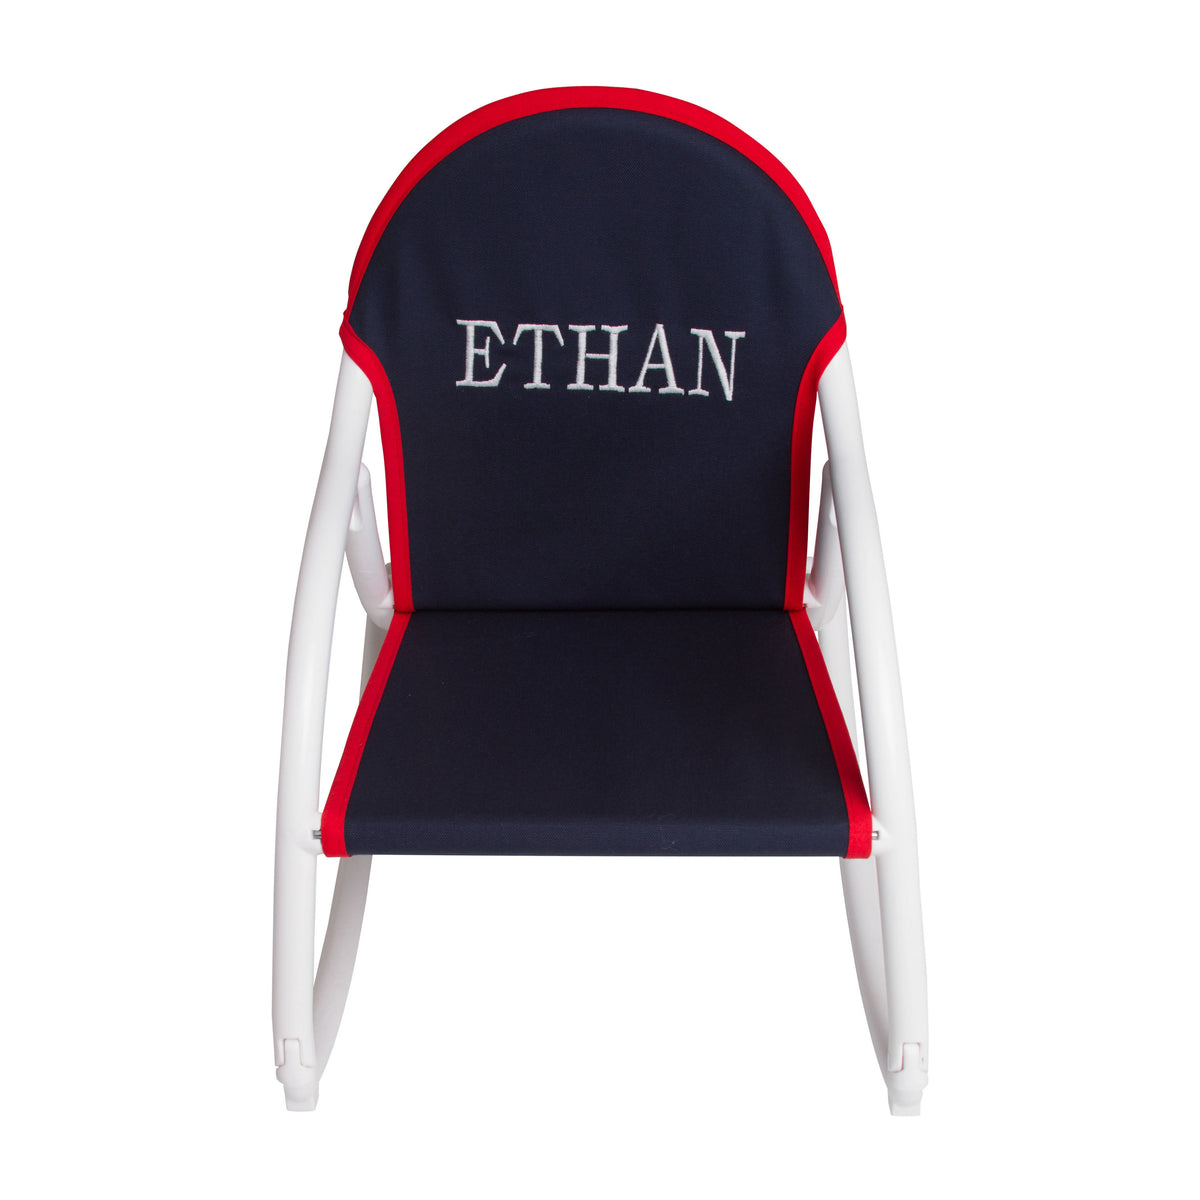 Personalized Rocking Chairs